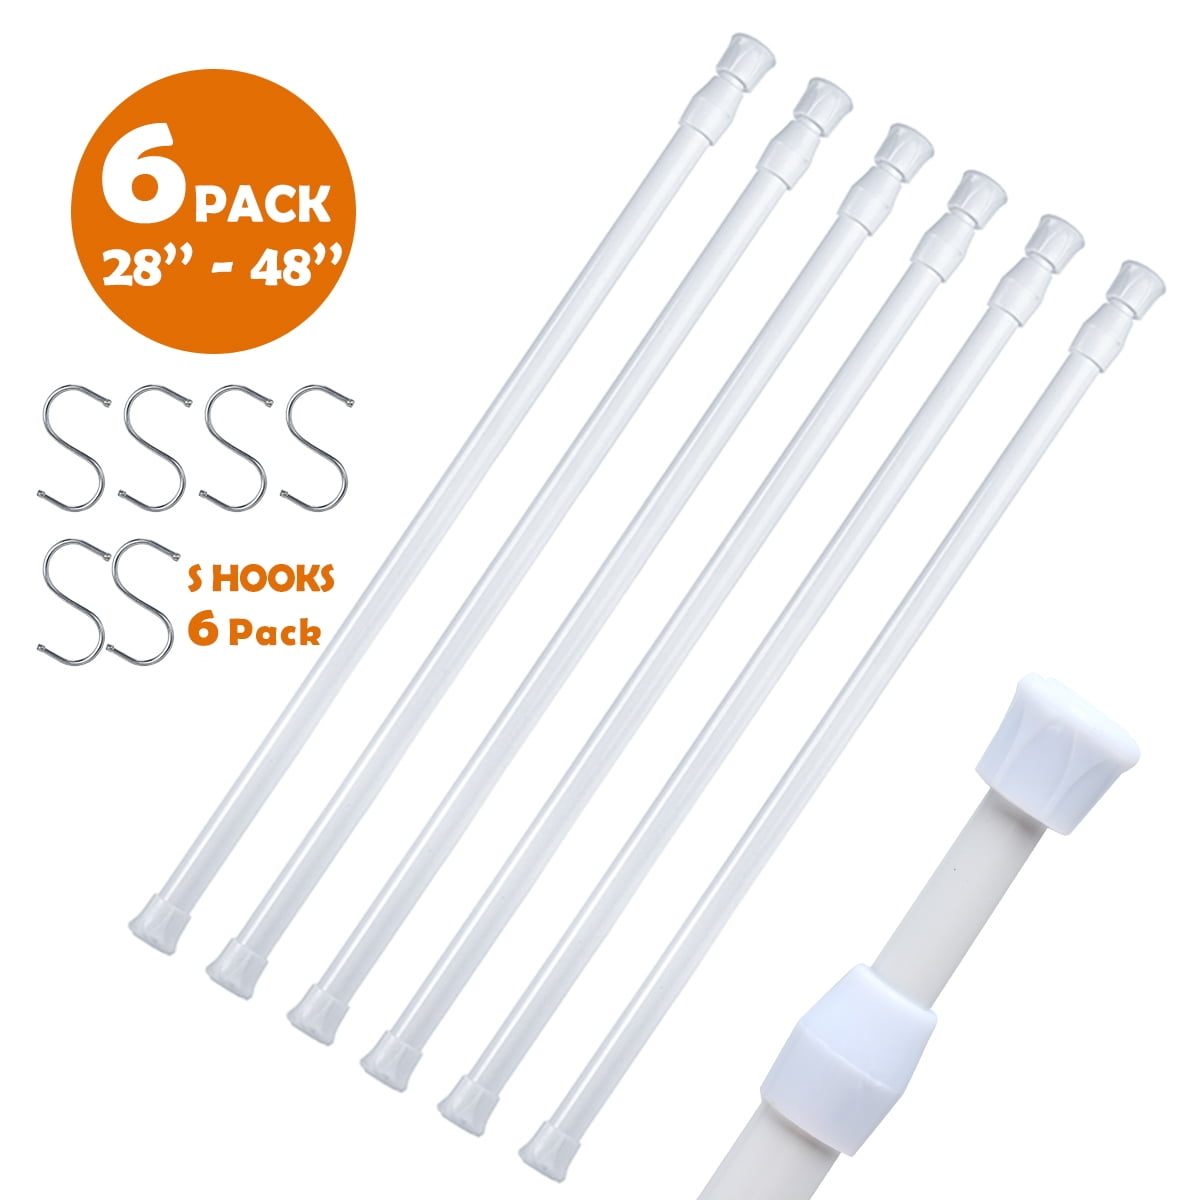 Black MinCHI257 Tension Rods 28 to 48 Inches 6 Pack，Tension Curtain Rod,Spring Curtain Rods Window Rods Kitchen Window Bathroom White Thin Tension Rod